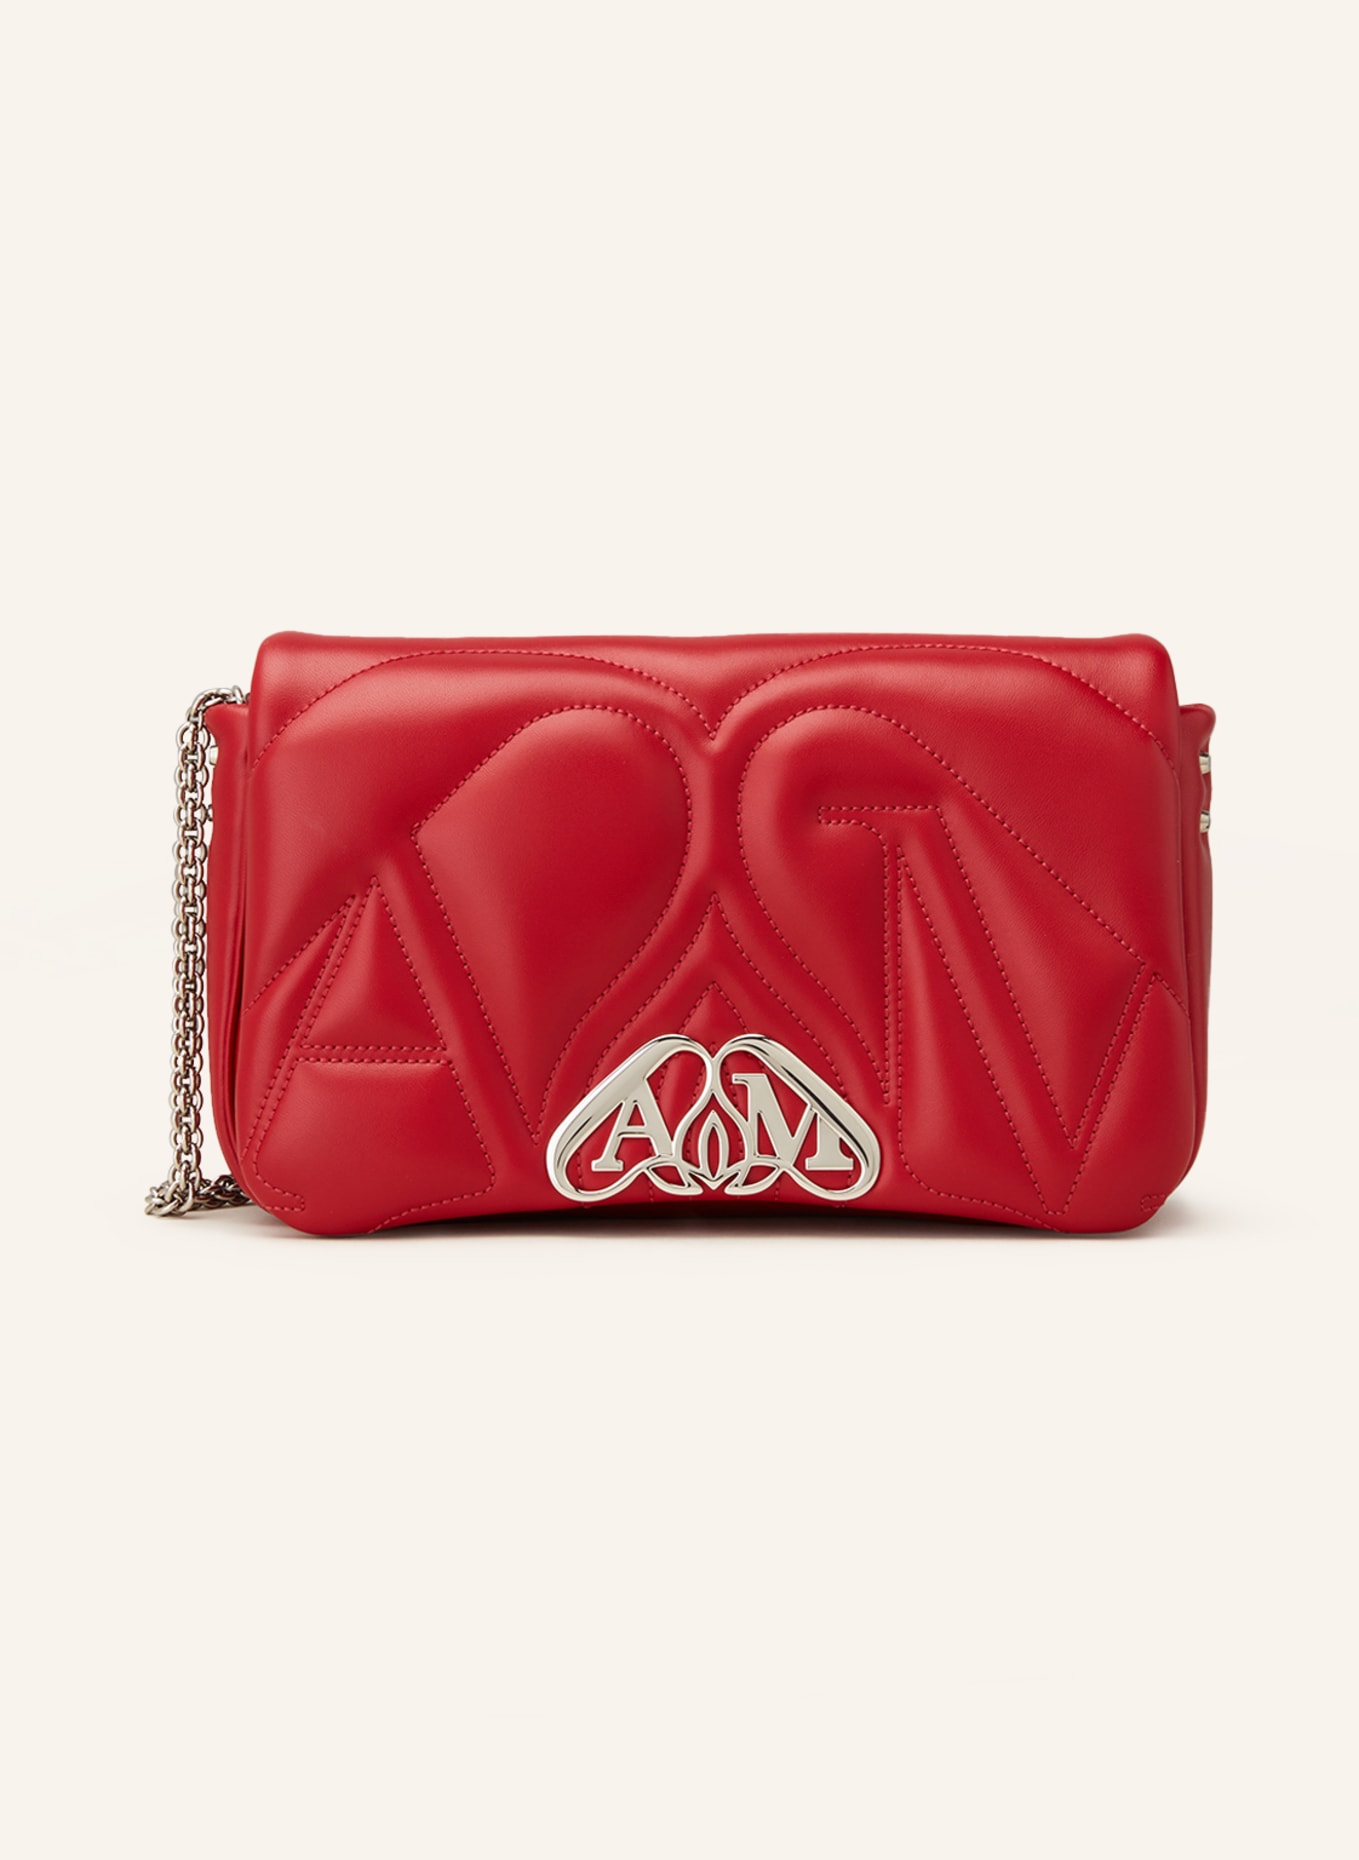 Alexander McQUEEN Shoulder bag THE SEAL SMALL, Color: RED (Image 1)